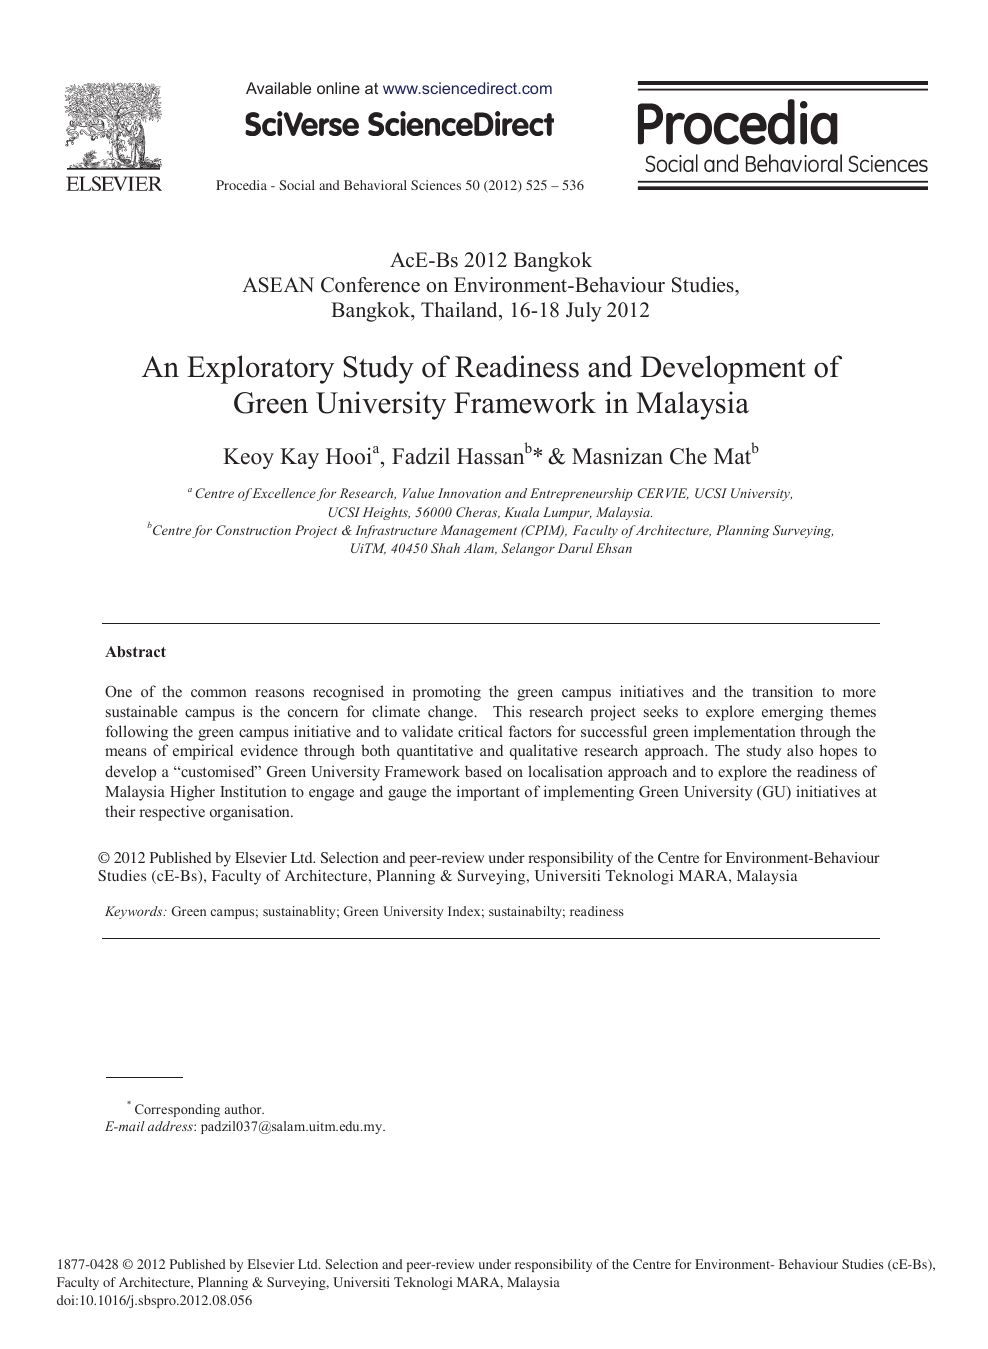 An Exploratory Study Of Readiness And Development Of Green University Framework In Malaysia Topic Of Research Paper In Agriculture Forestry And Fisheries Download Scholarly Article Pdf And Read For Free On